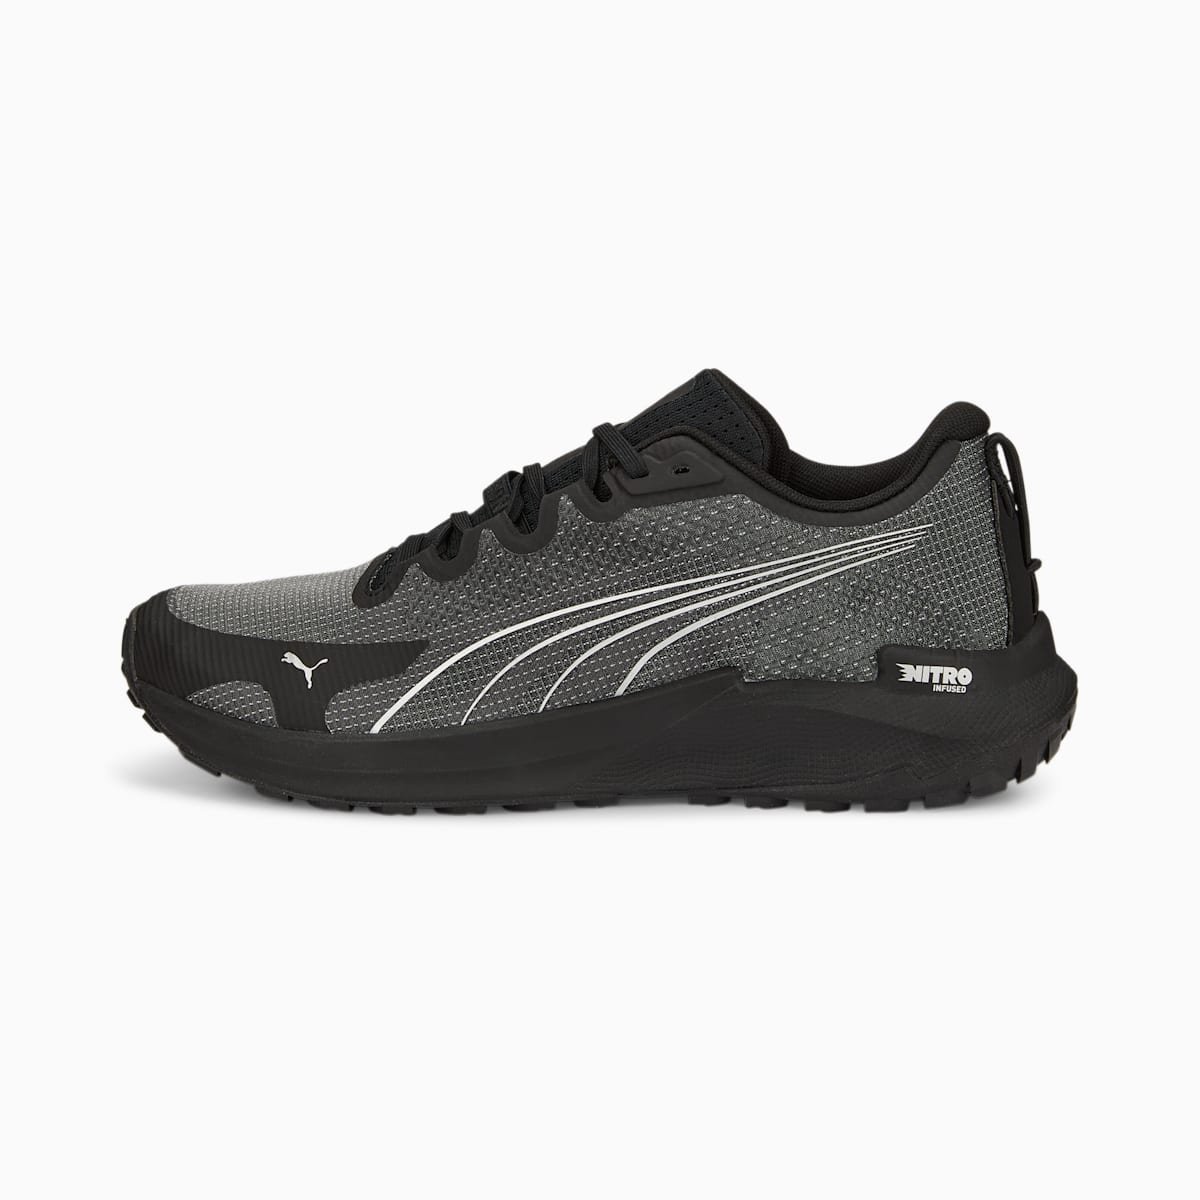 Chaussures de running Fast-Trac NITRO Homme